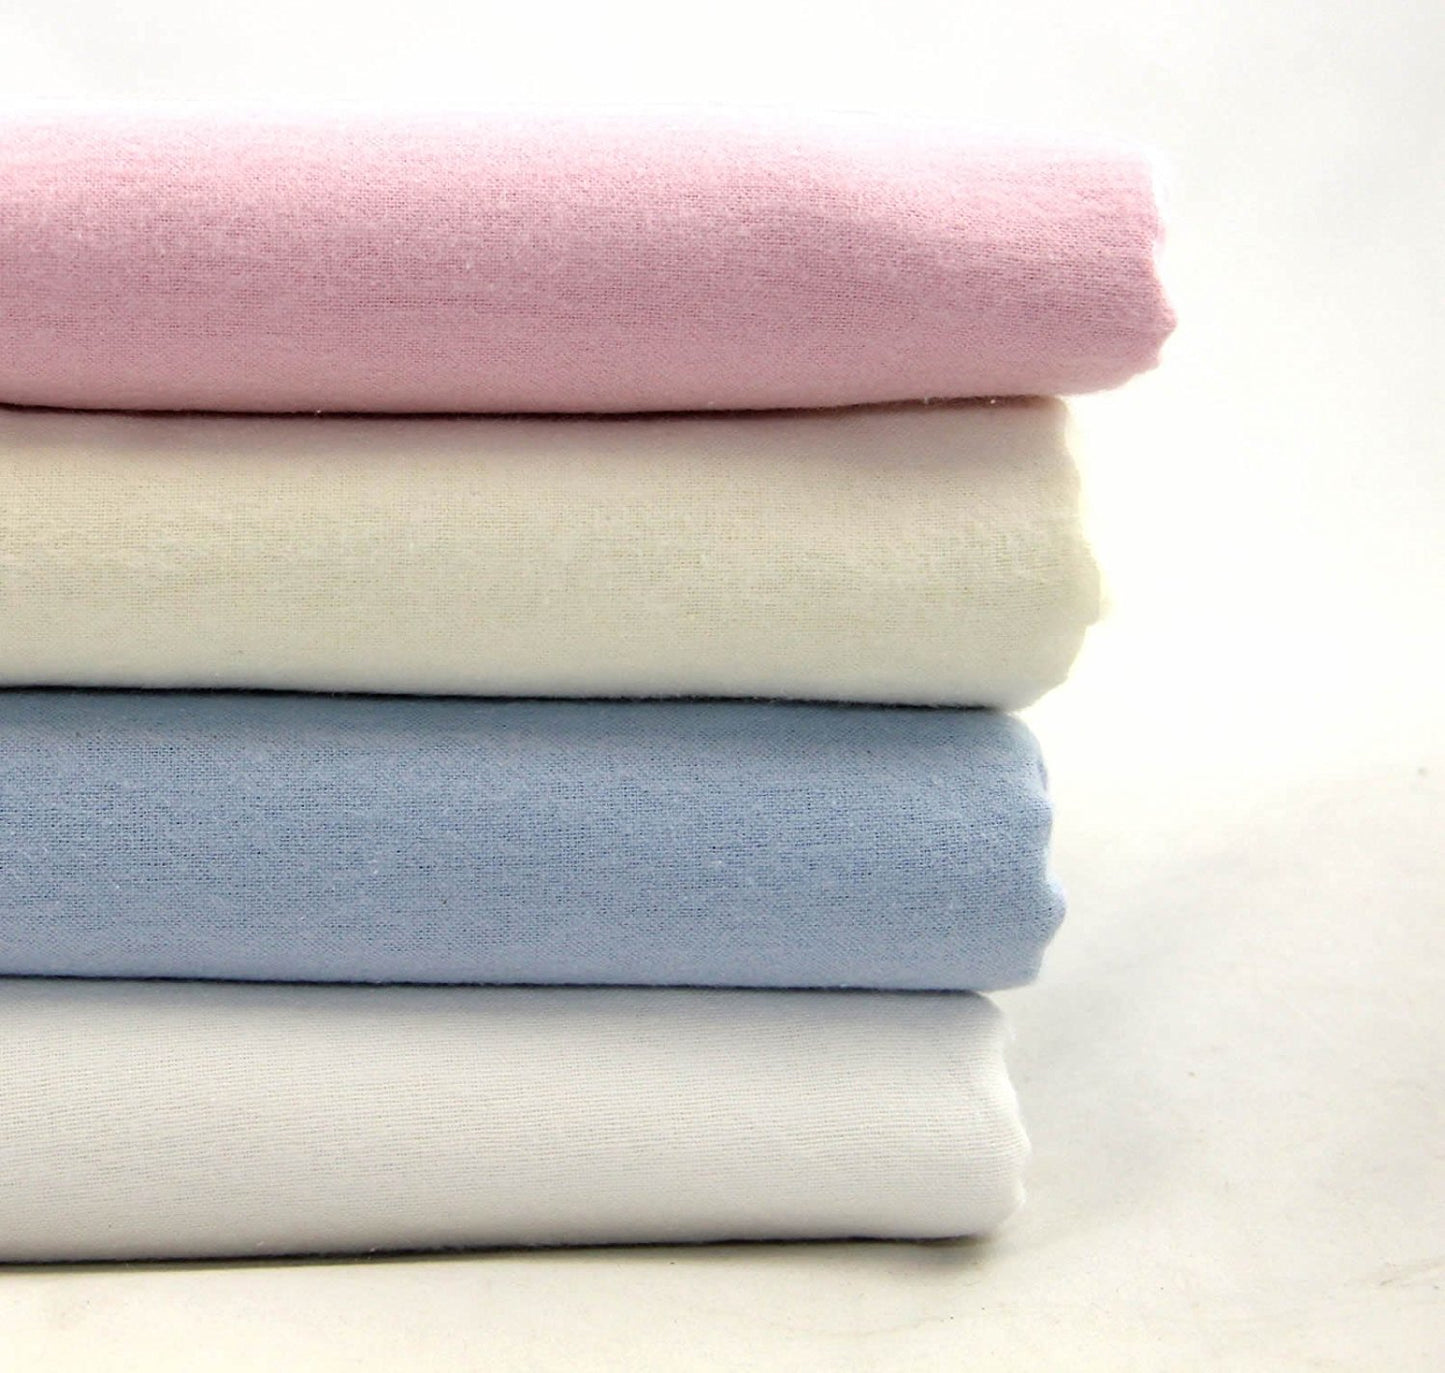 Pink  Sheets/Pillow Cases Rigg's Flannelette Sheets